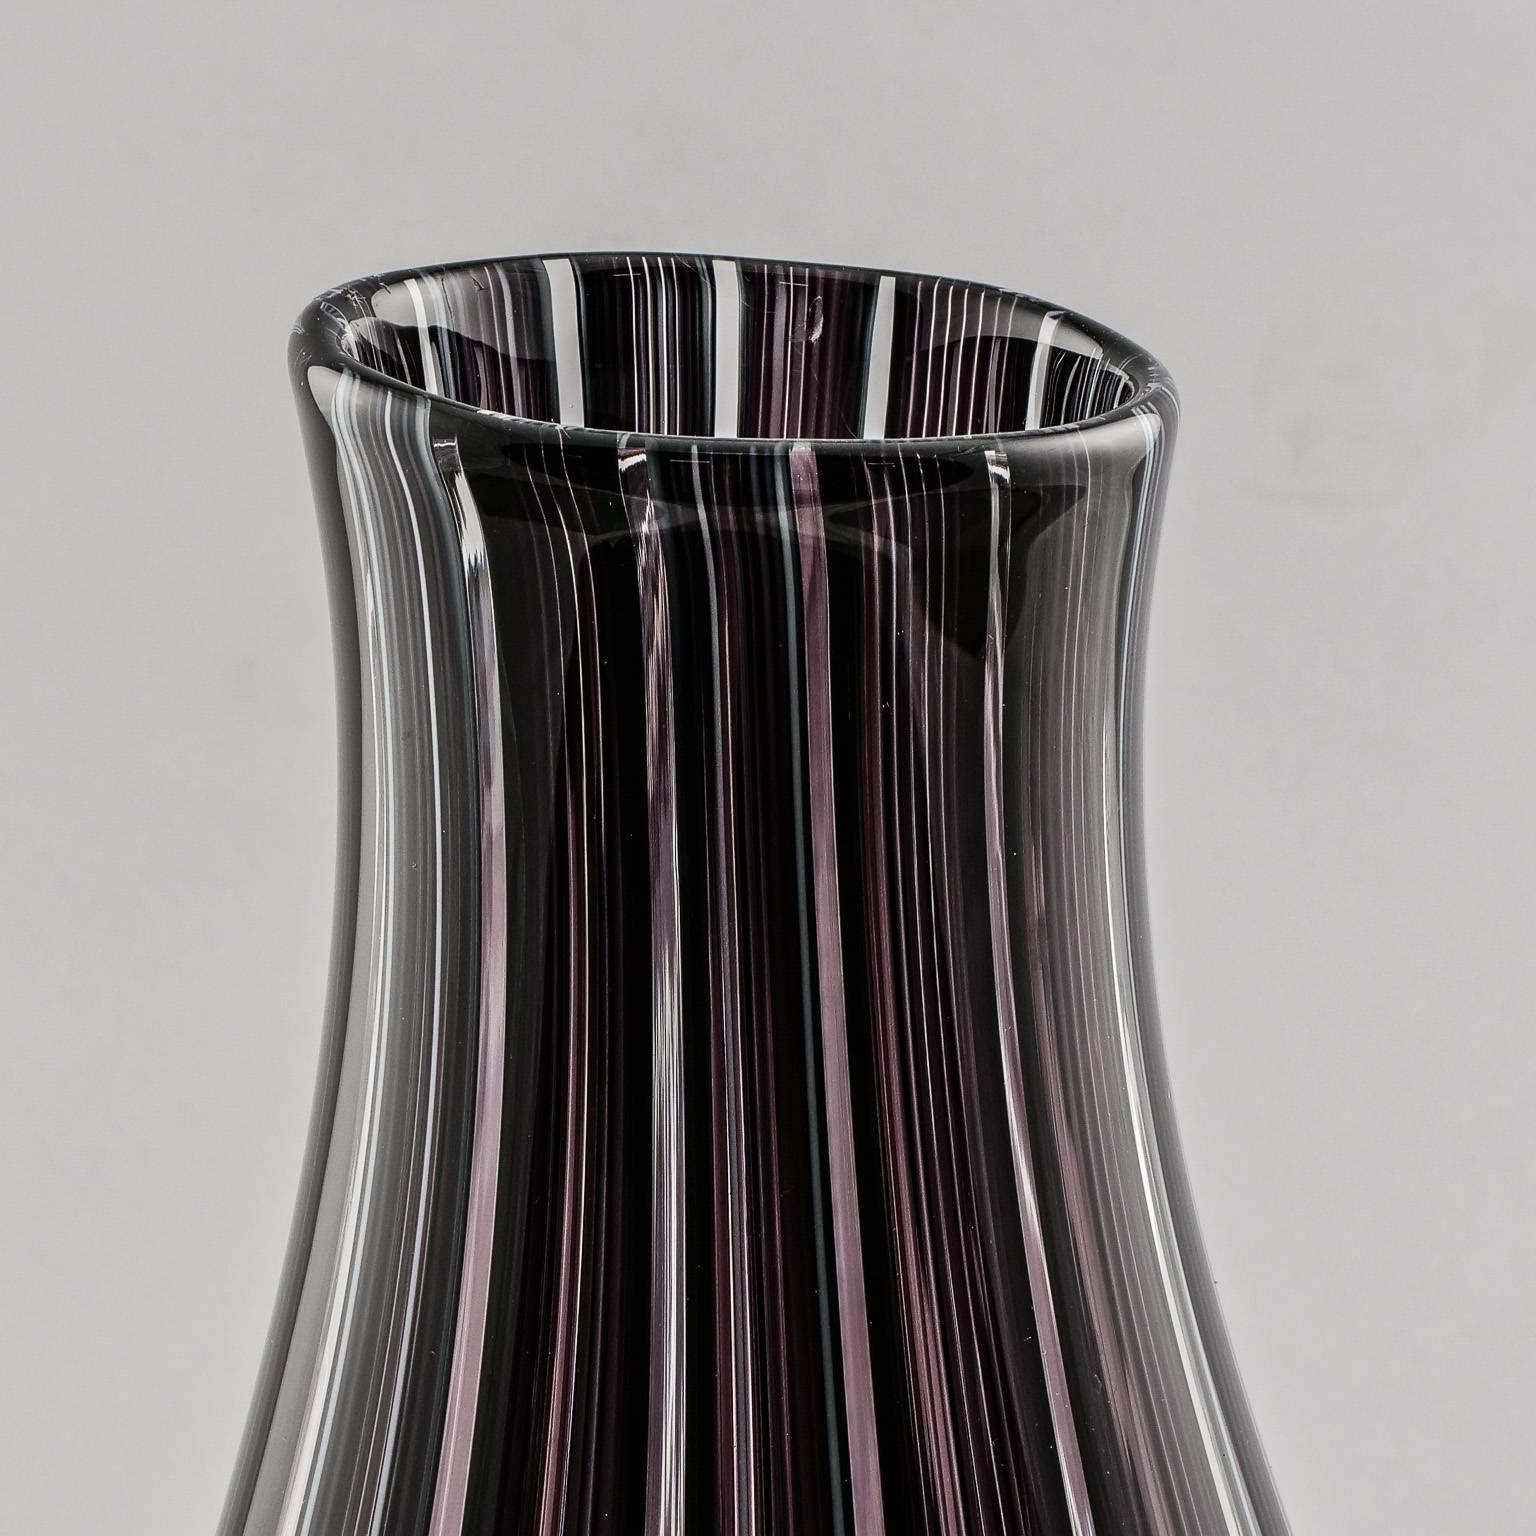 Murano art glass vase signed by artist Adriano dalla Valentina, circa 1980s. Vase is just under 15” tall with deep aubergine vertical bands. Excellent vintage condition.